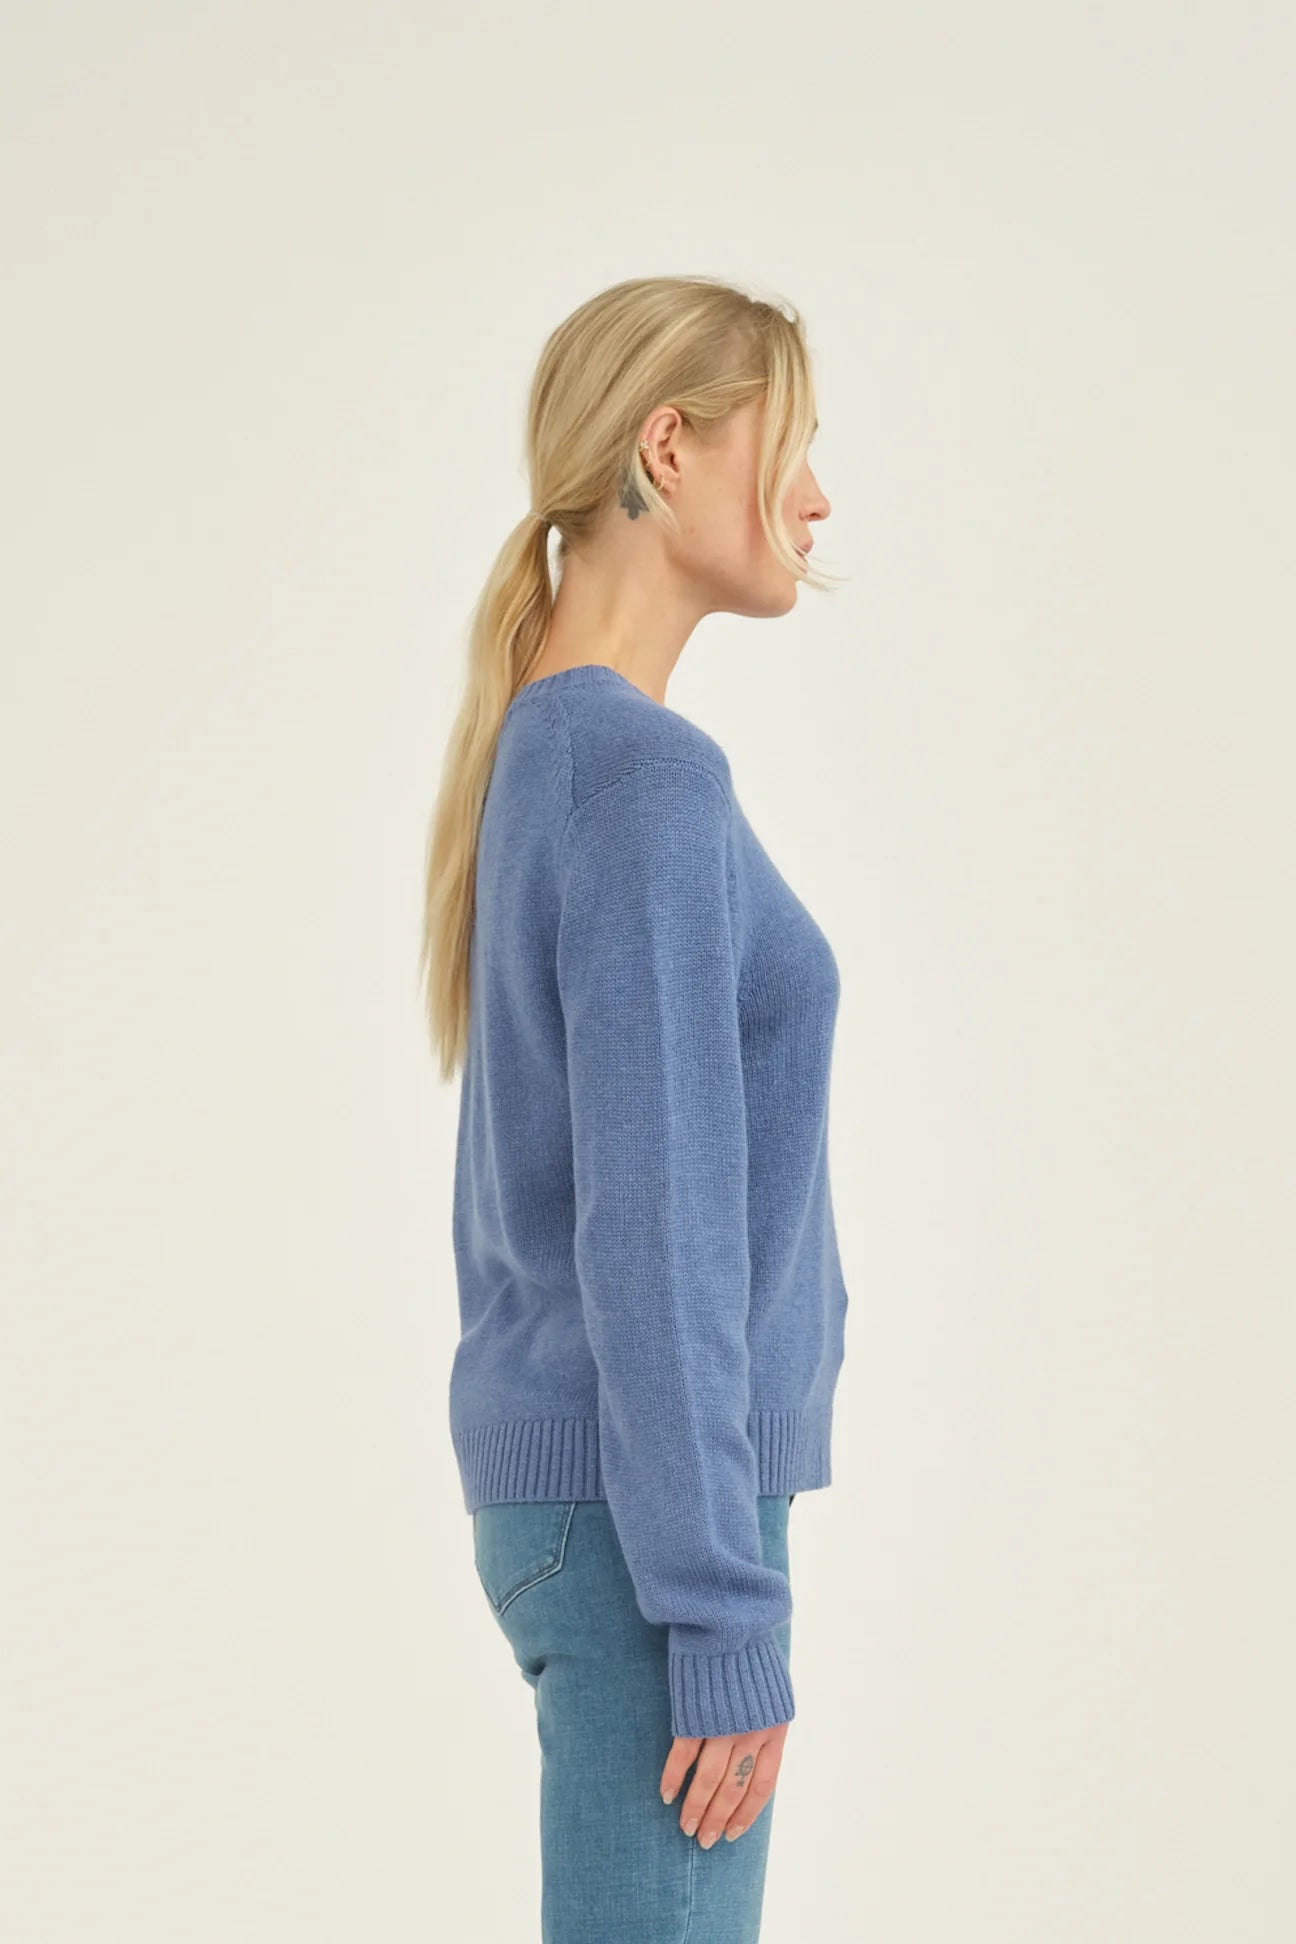 Denim blue knitted jumper with crew neck and long sleeves